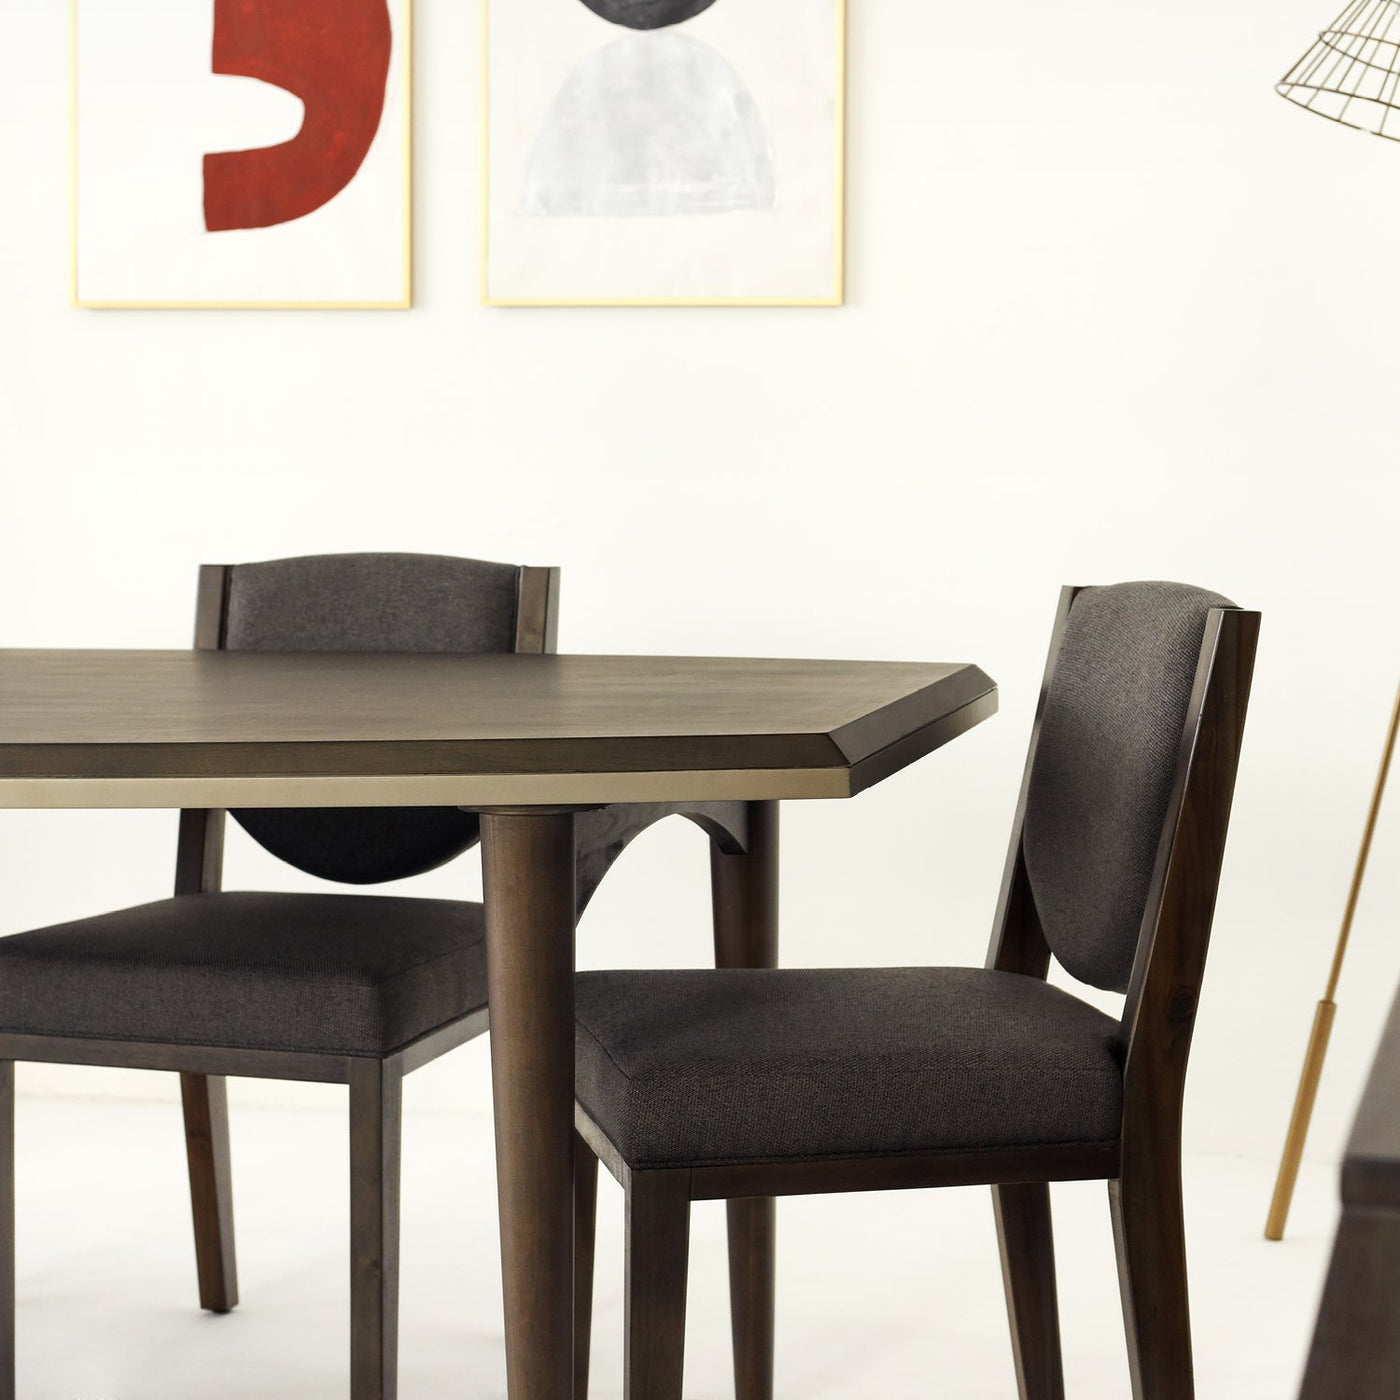 Odd Chic Mid-Sized Dining Table in Dark Acacia